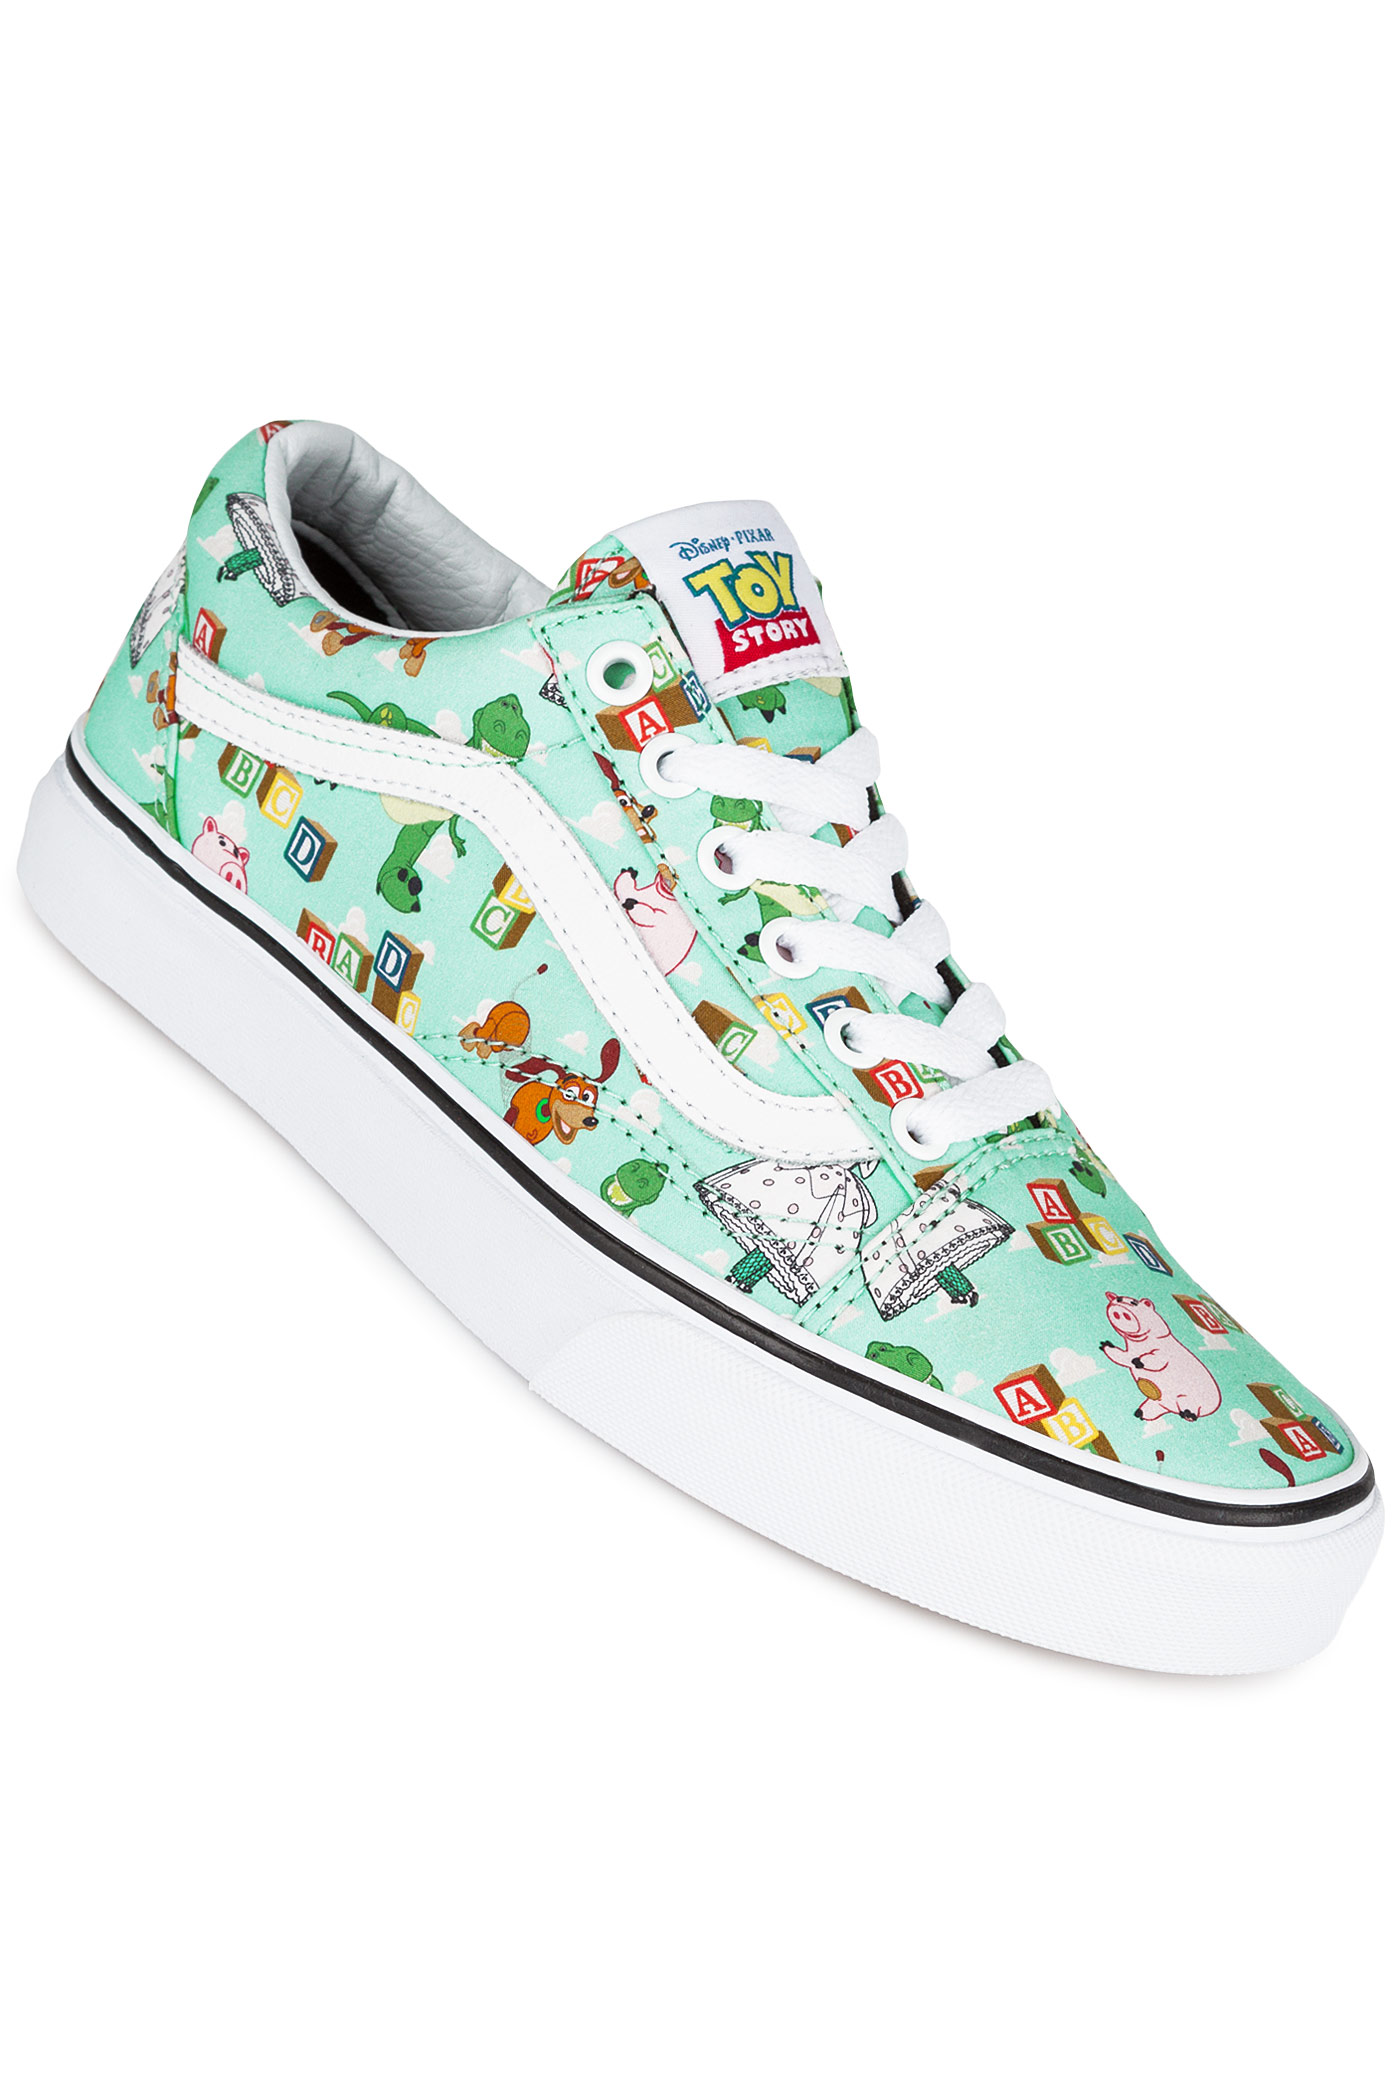 Vans x Toy Story Old Skool Shoes women (andys toys blue